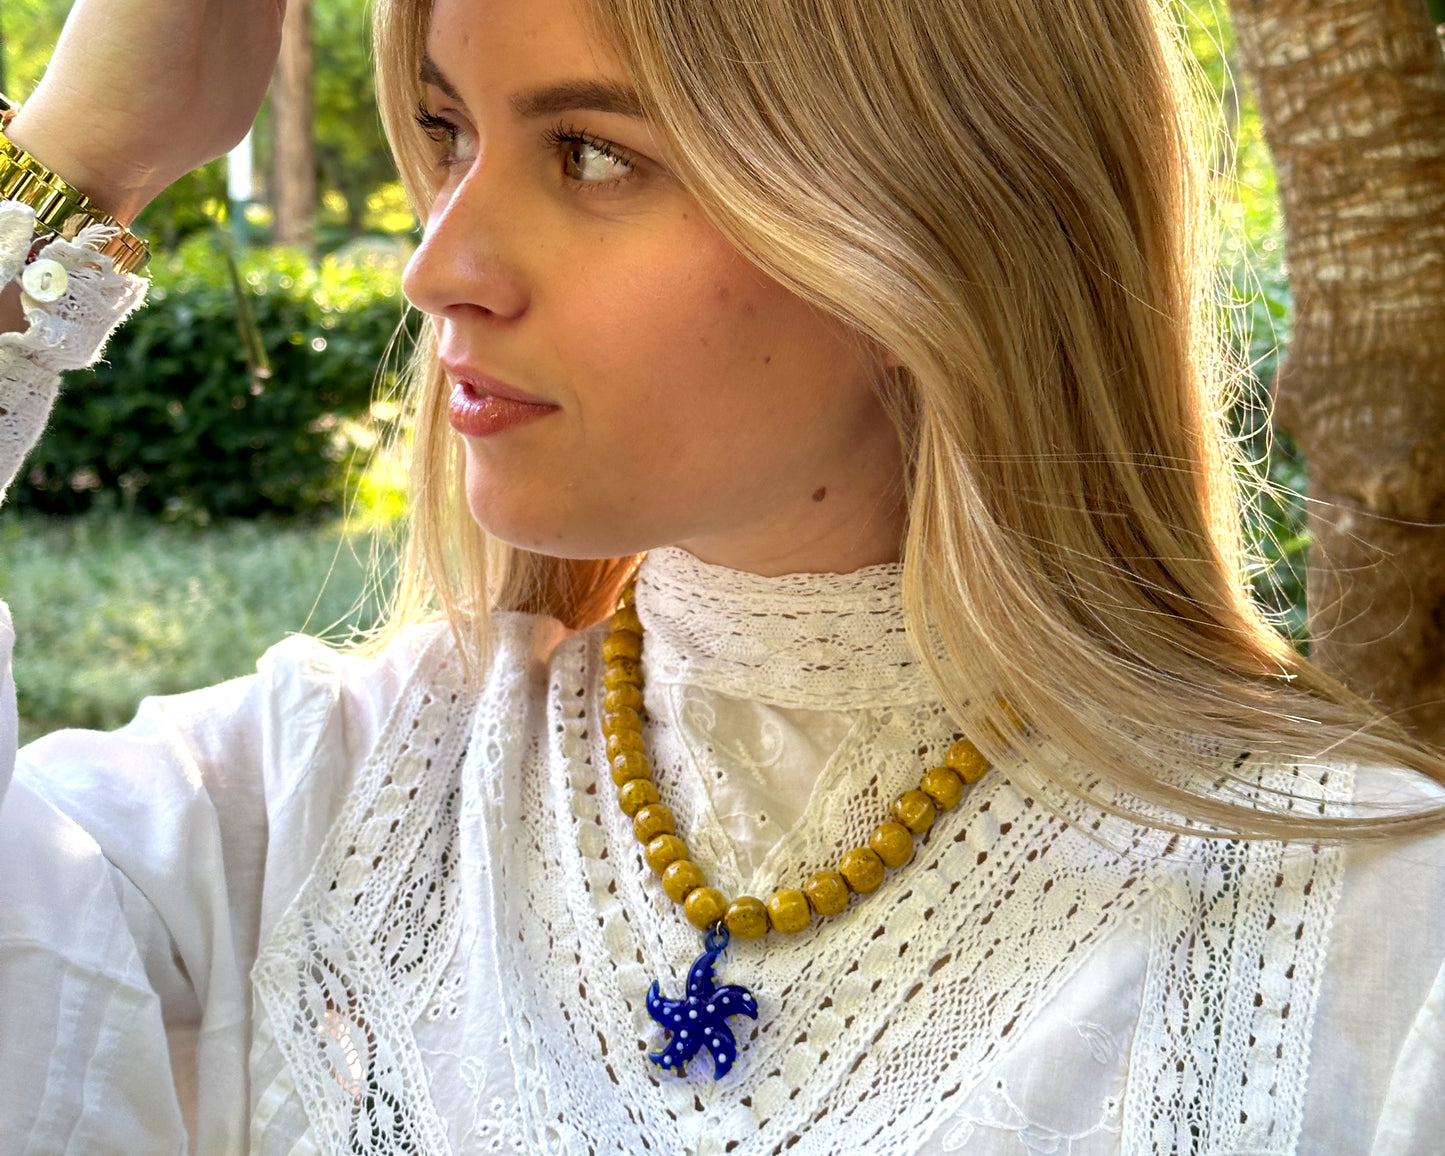 Yellow and blue patrician necklace